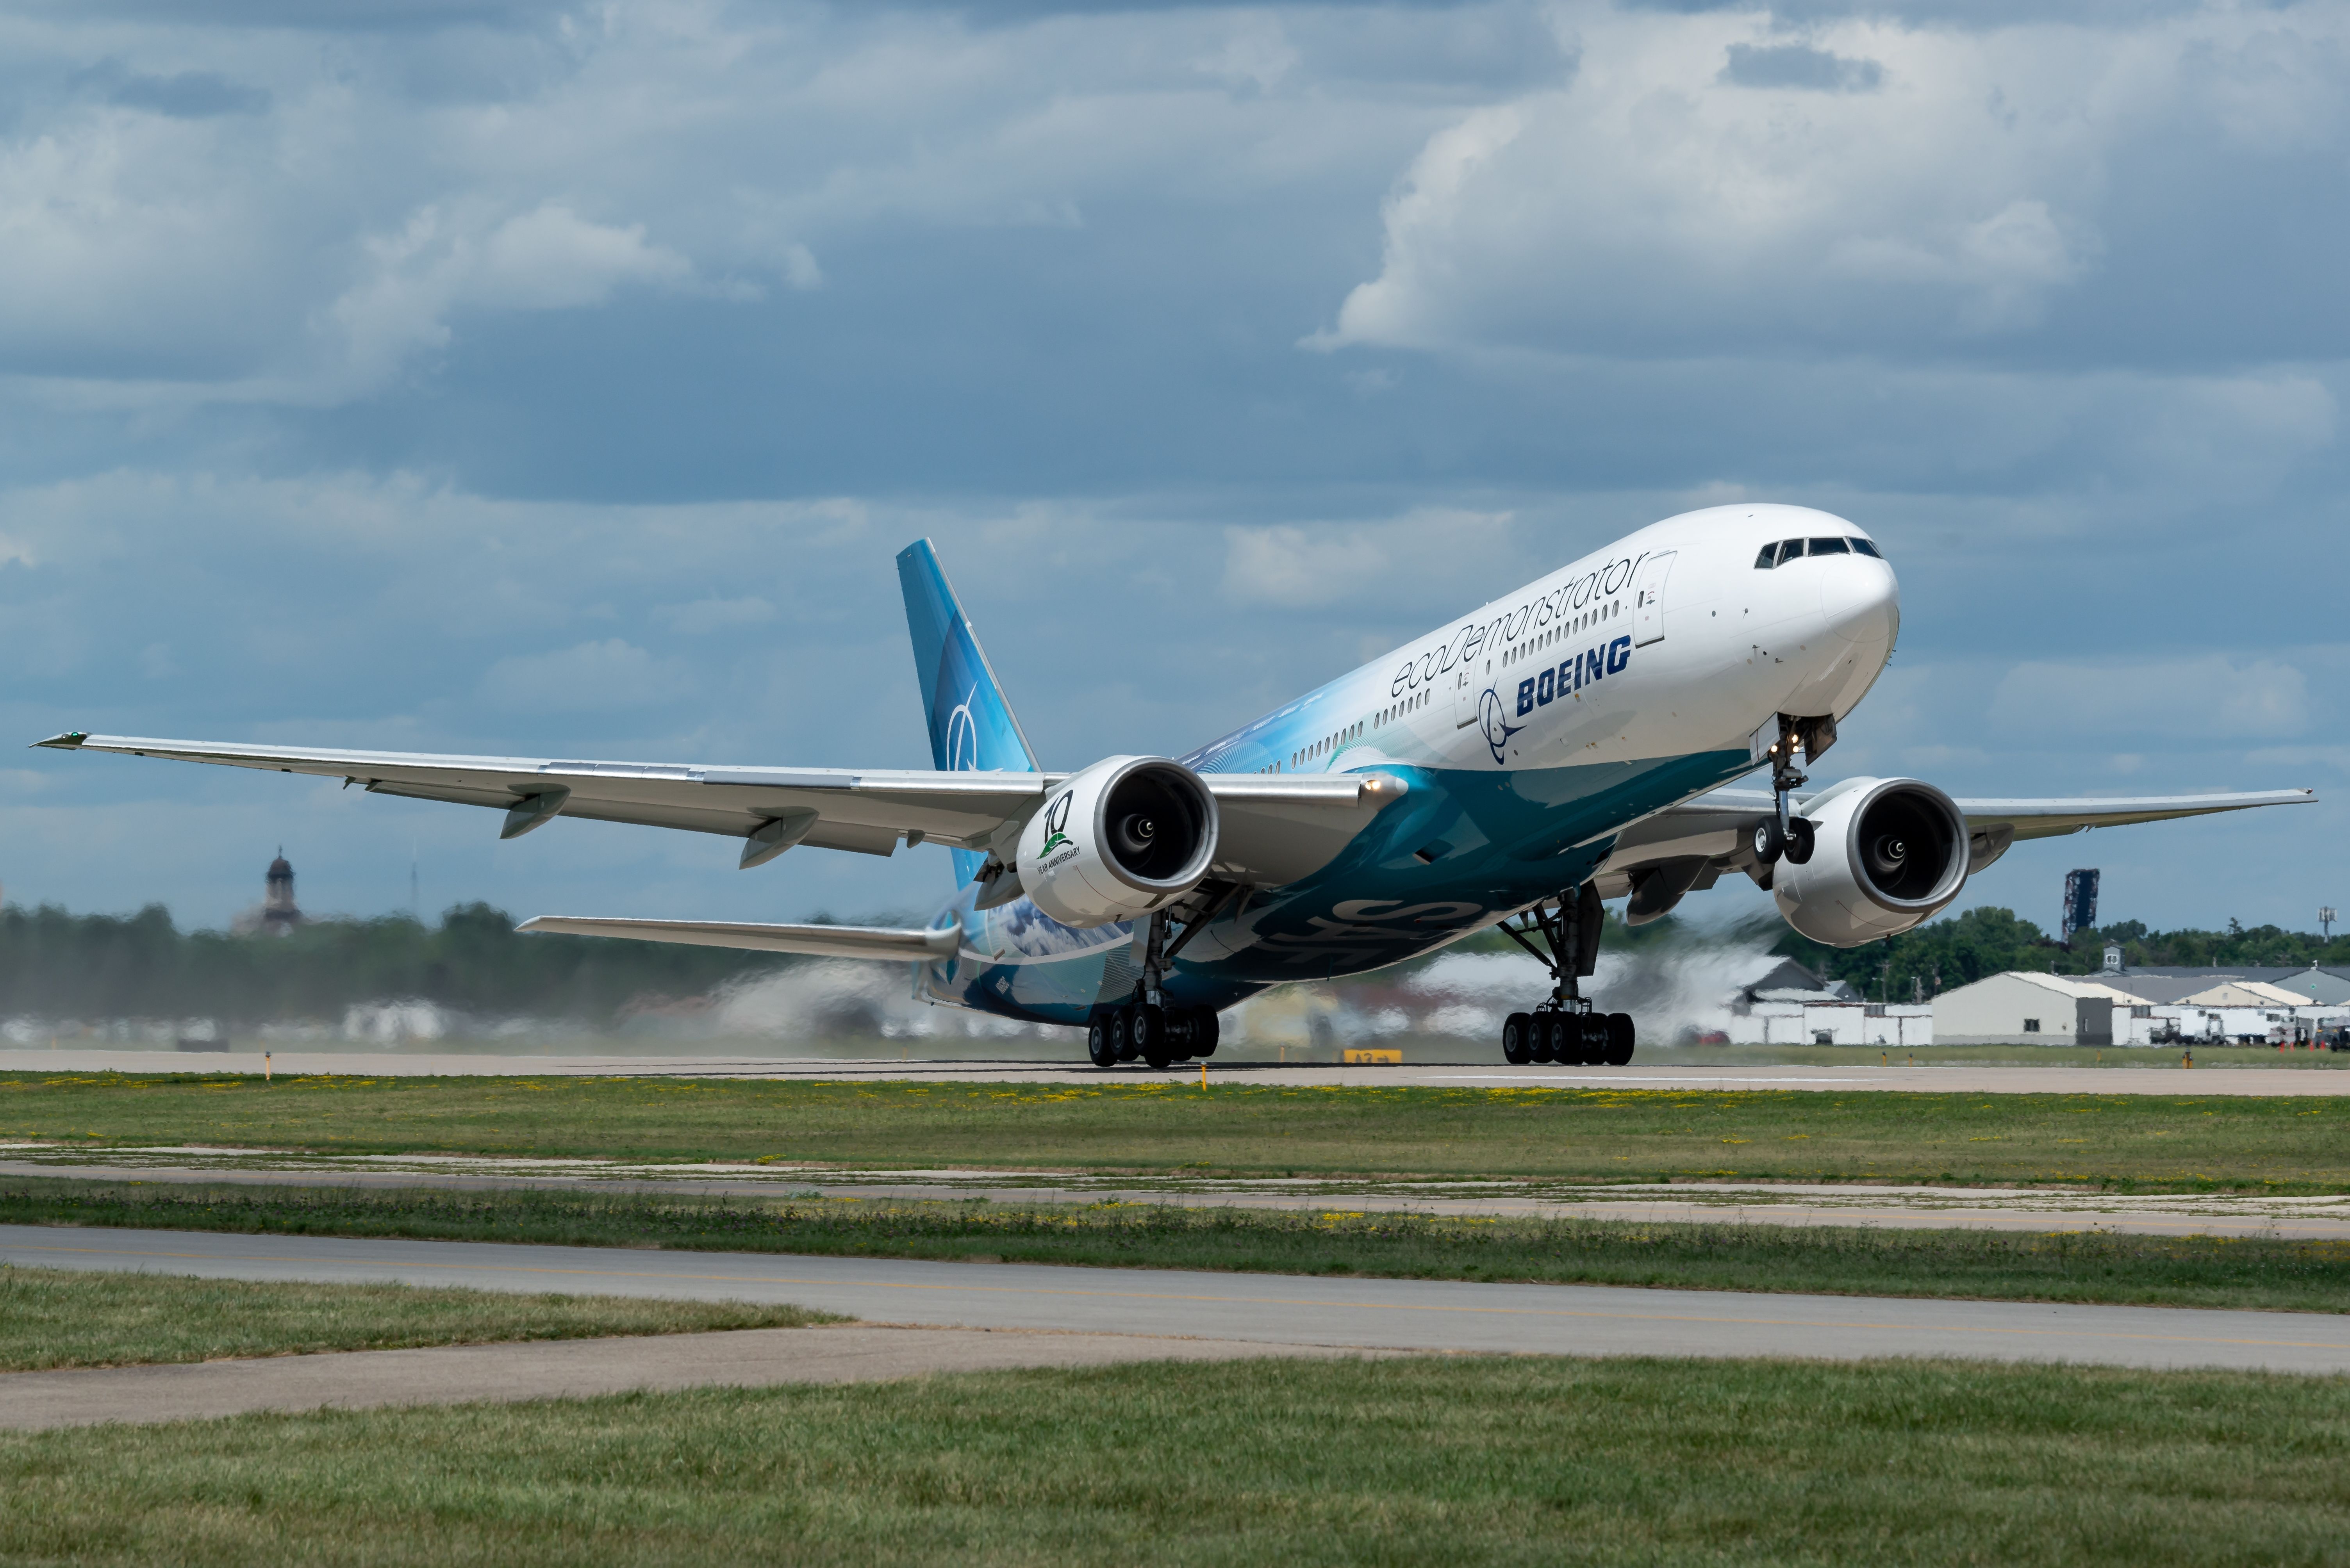 Oshkosh Wittman airport Wisconsin USA - 07 28 2022: Boeing 777-200 ecoDemonstrator during take off for its display, flying with sustainable aviation fuel (SAF) at air venture 2022 airshow in Oshkosh